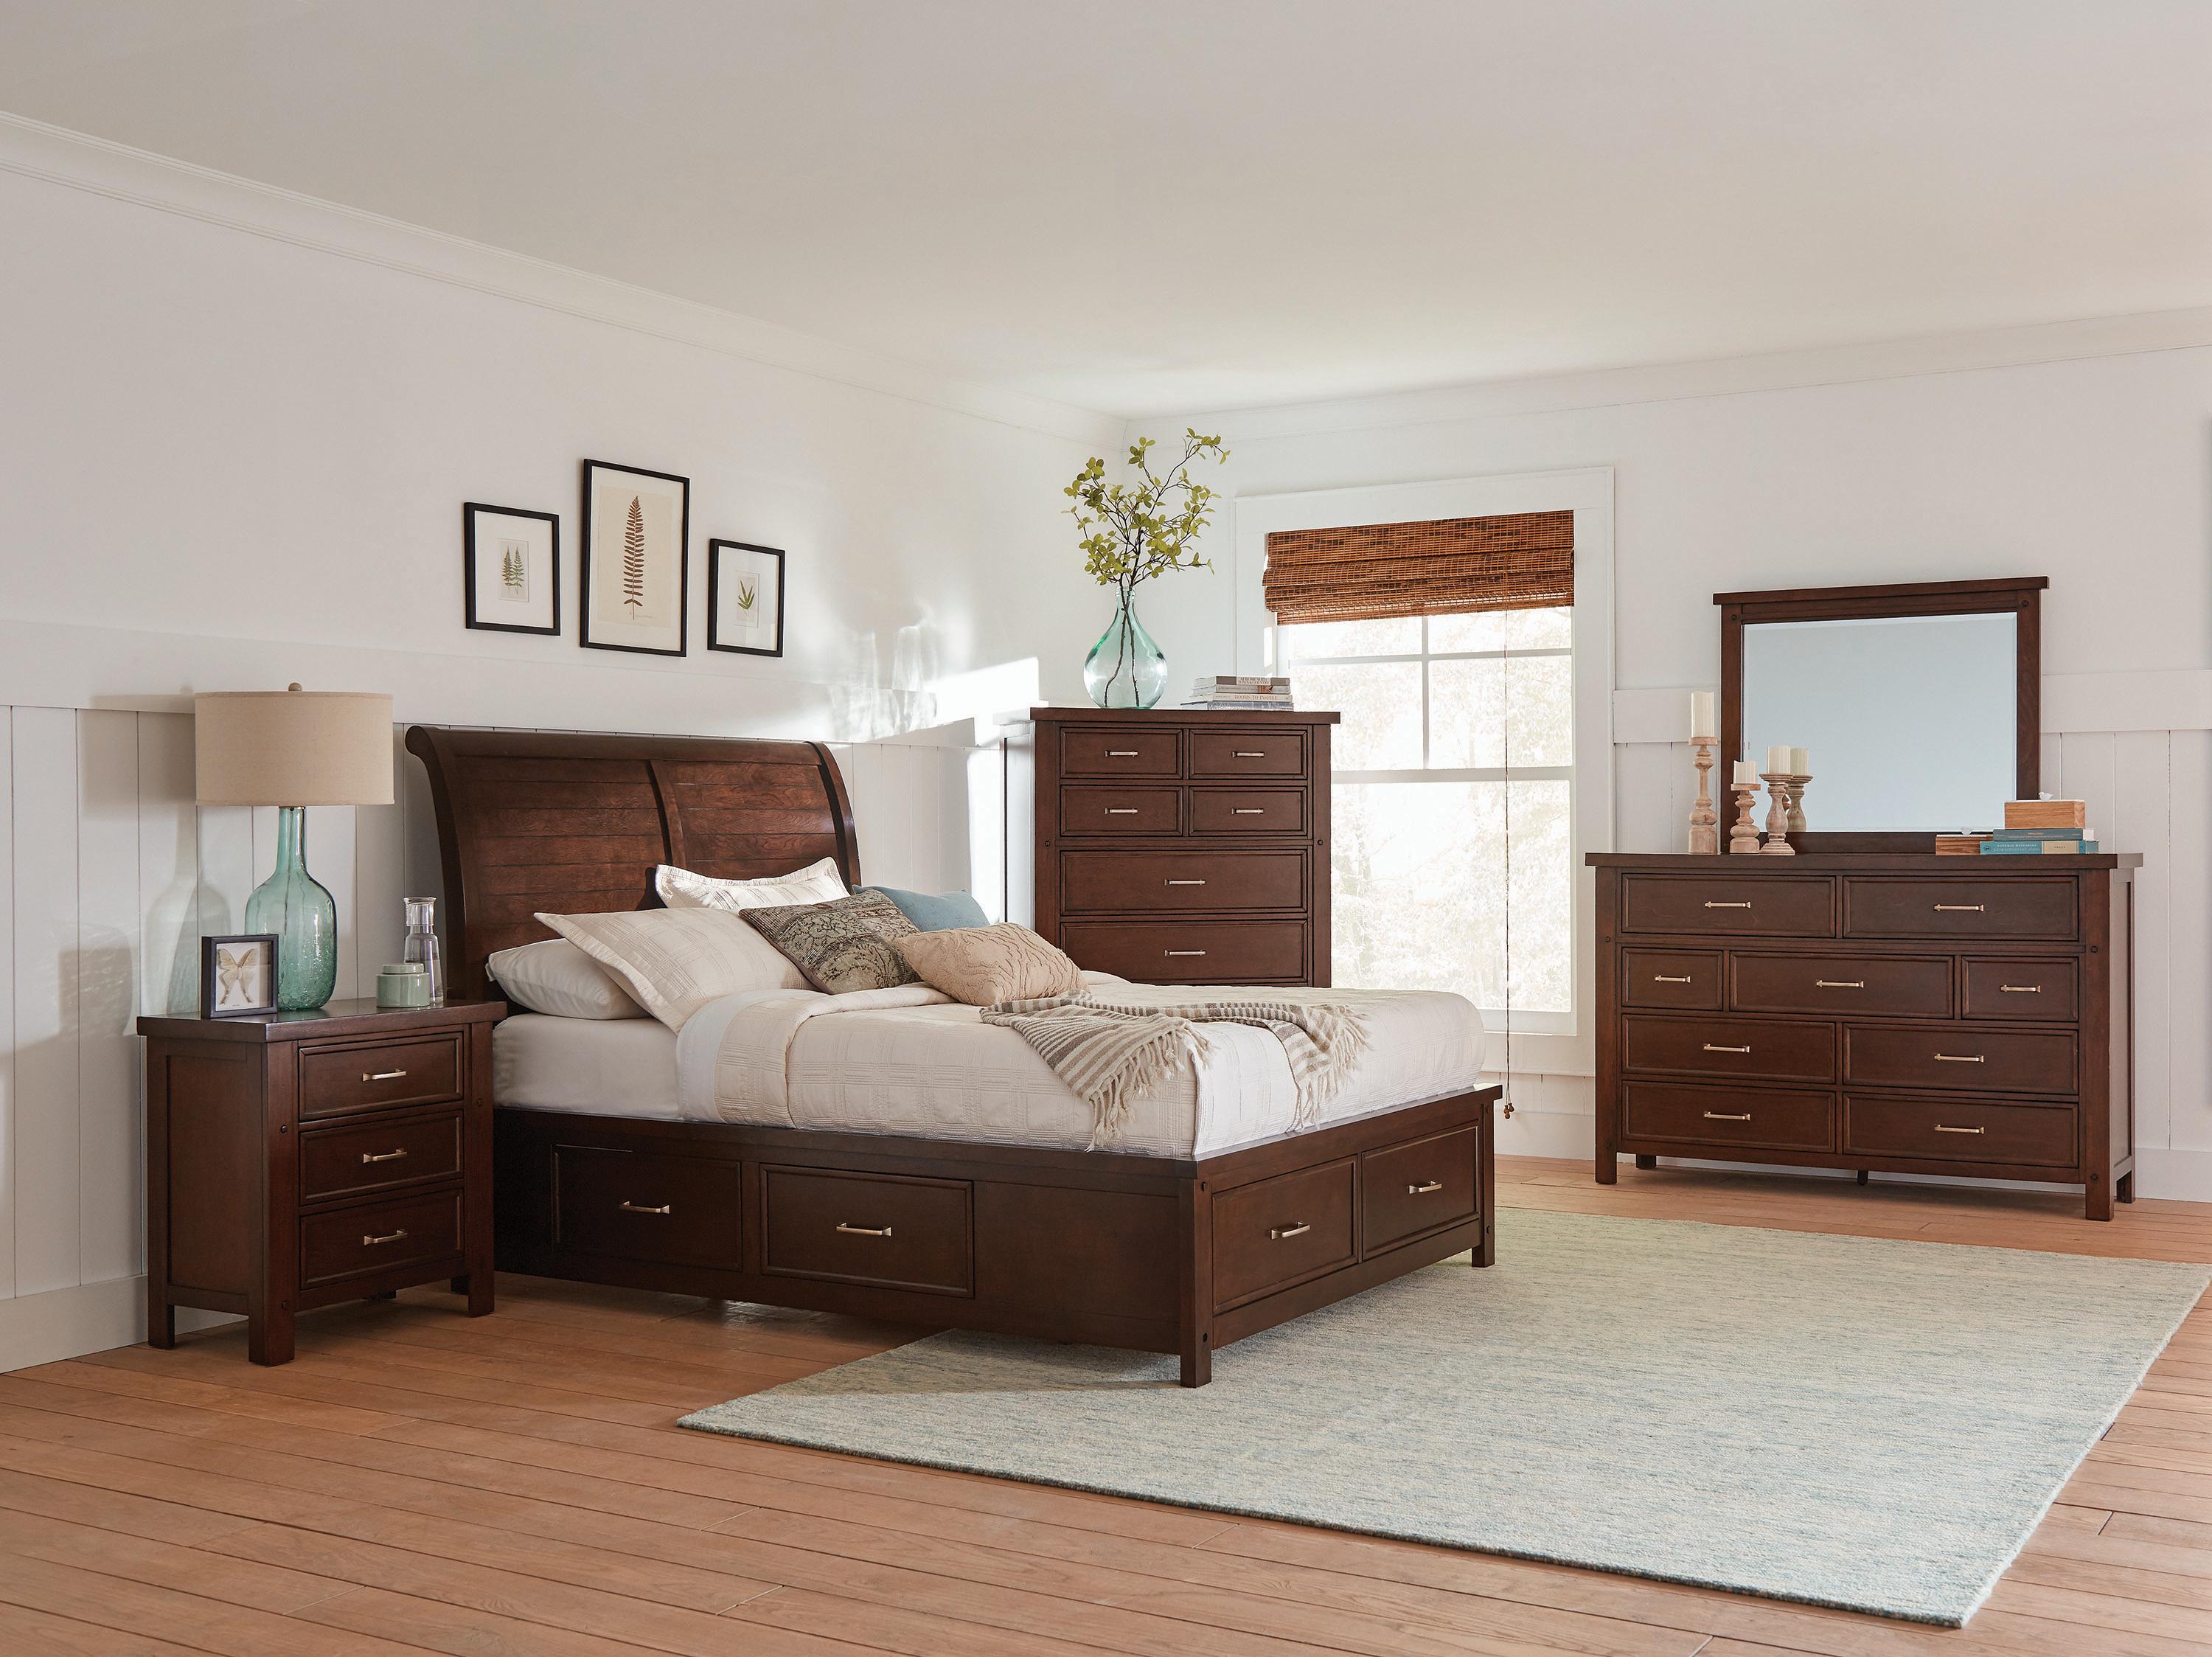 

    
Transitional Pinot Noir Solid Wood Queen Bedroom Set 5pcs Coaster 206430Q Barstow
